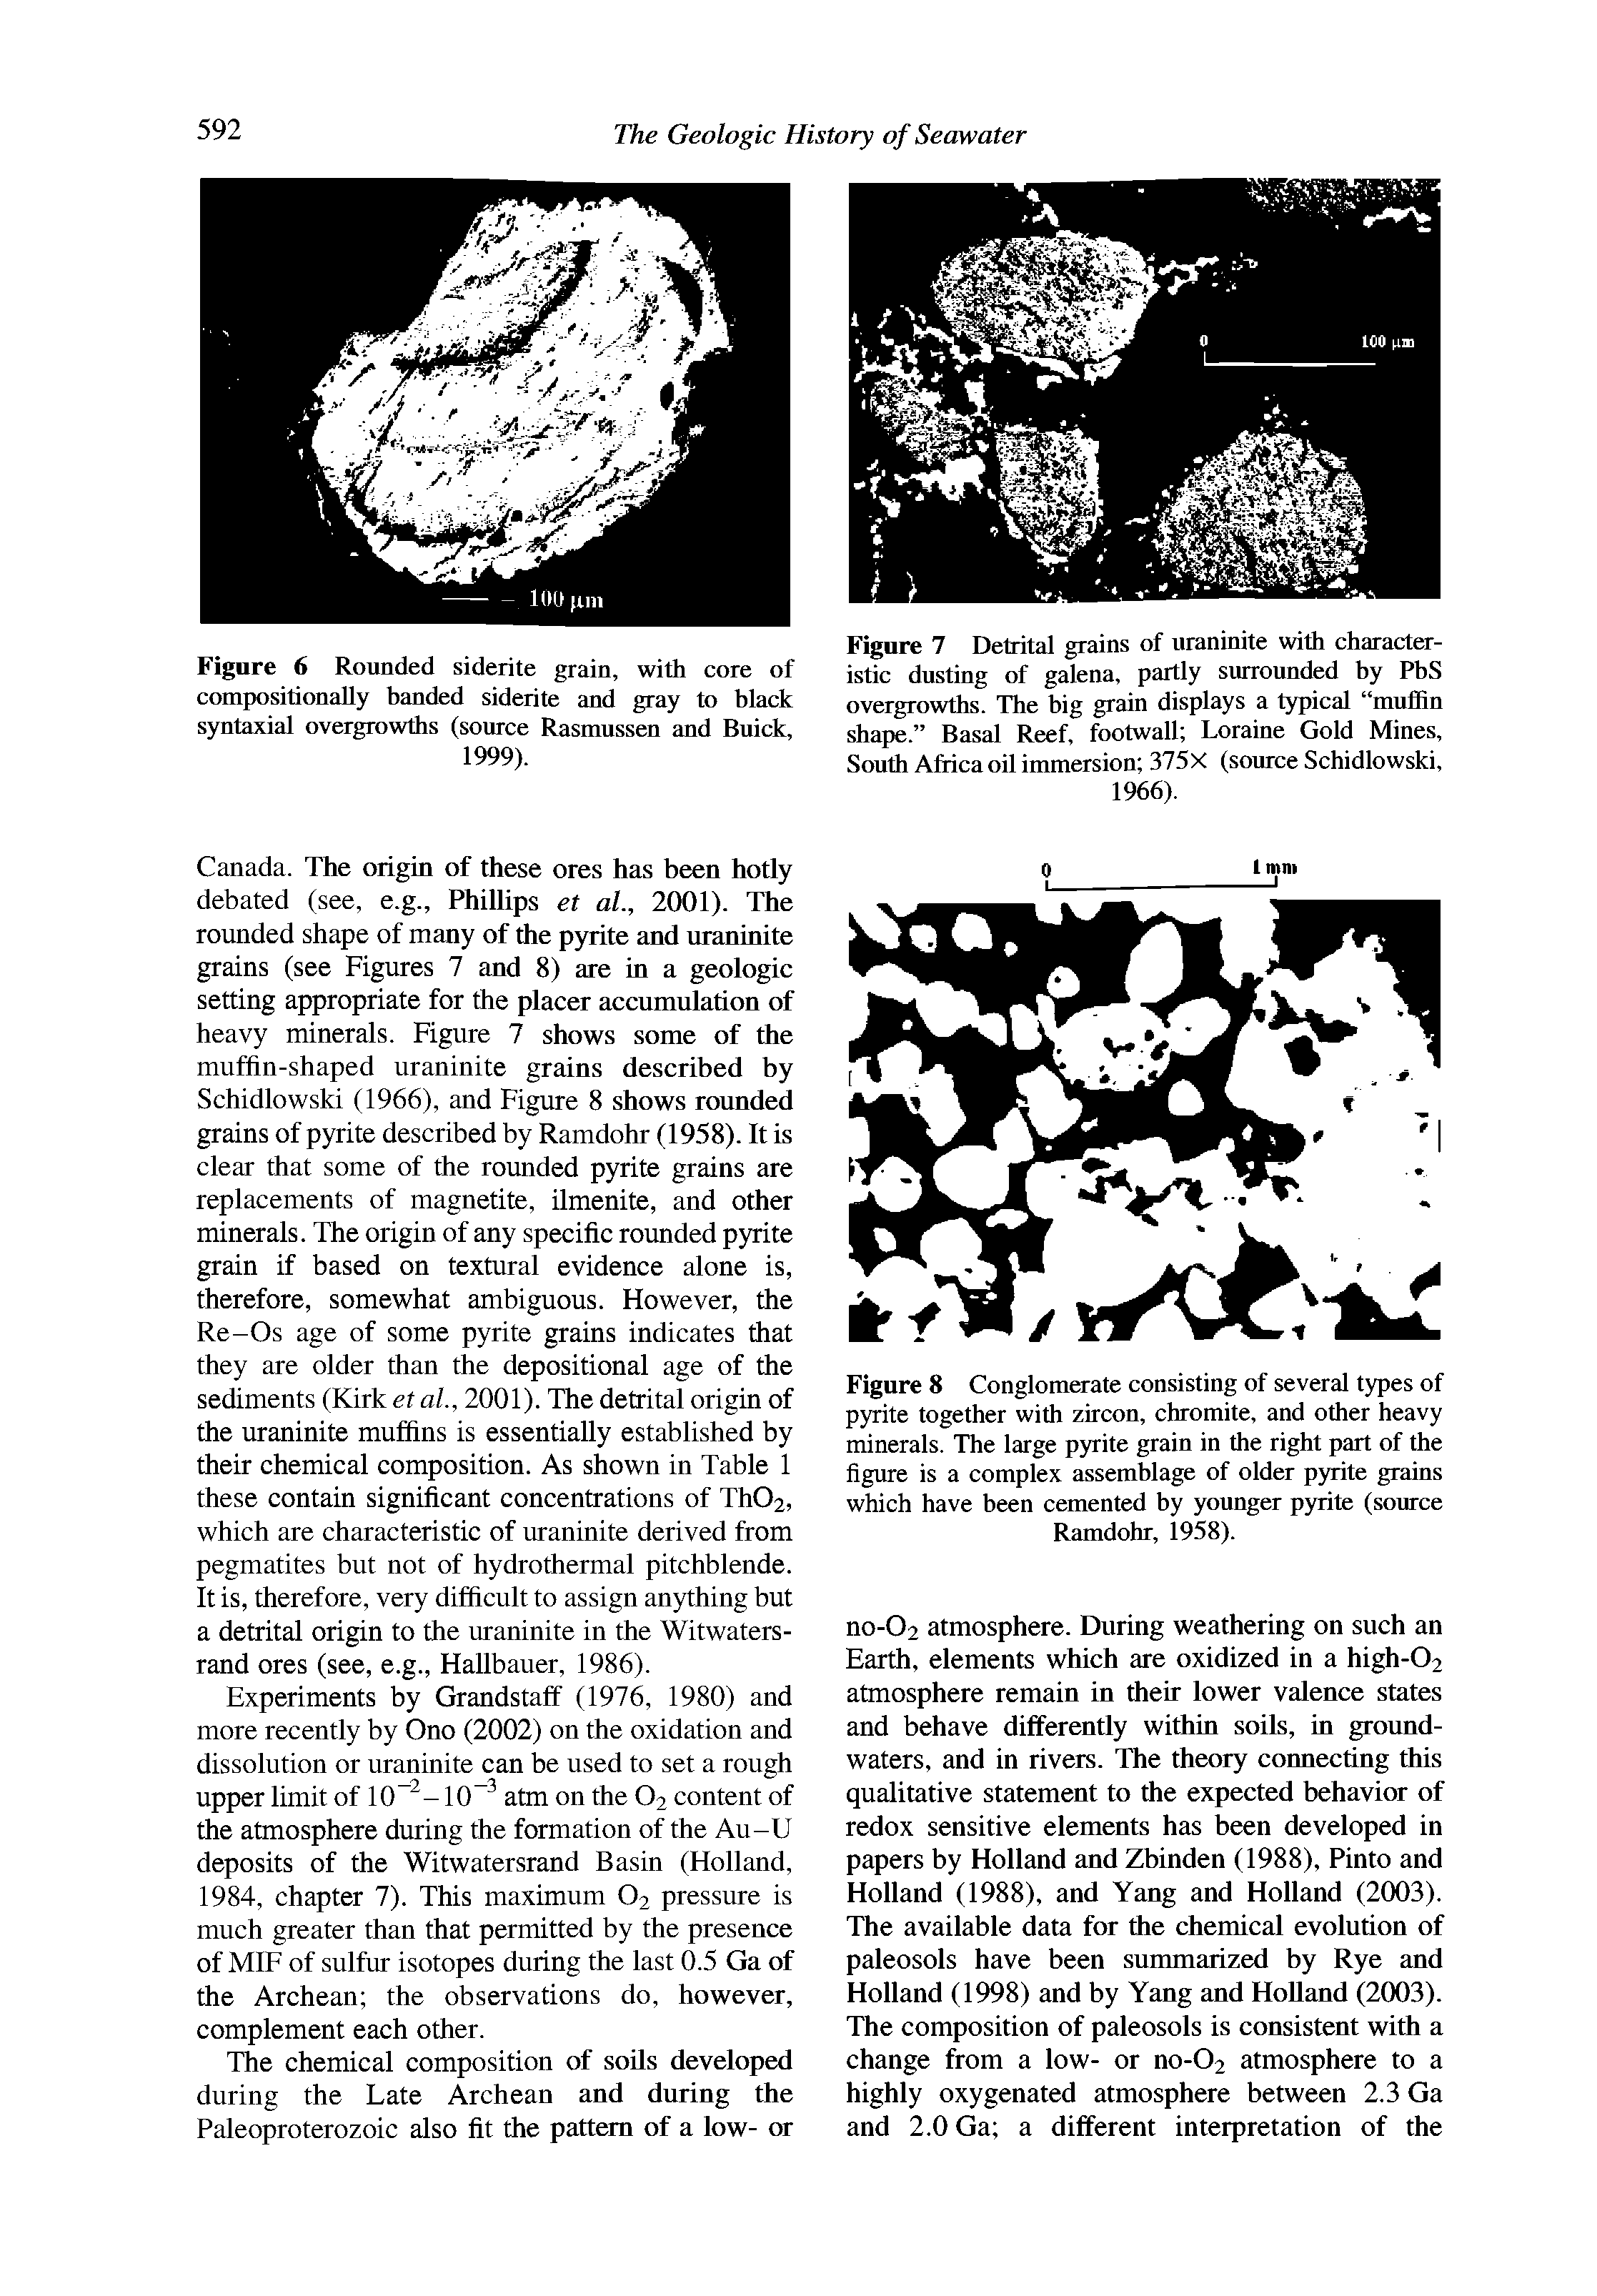 Figure 8 Conglomerate consisting of several types of pyrite together with zircon, chromite, and other heavy minerals. The large pyrite grain in the right part of the figure is a complex assemblage of older pyrite grains which have been cemented by younger pyrite (source Ramdohr, 1958).